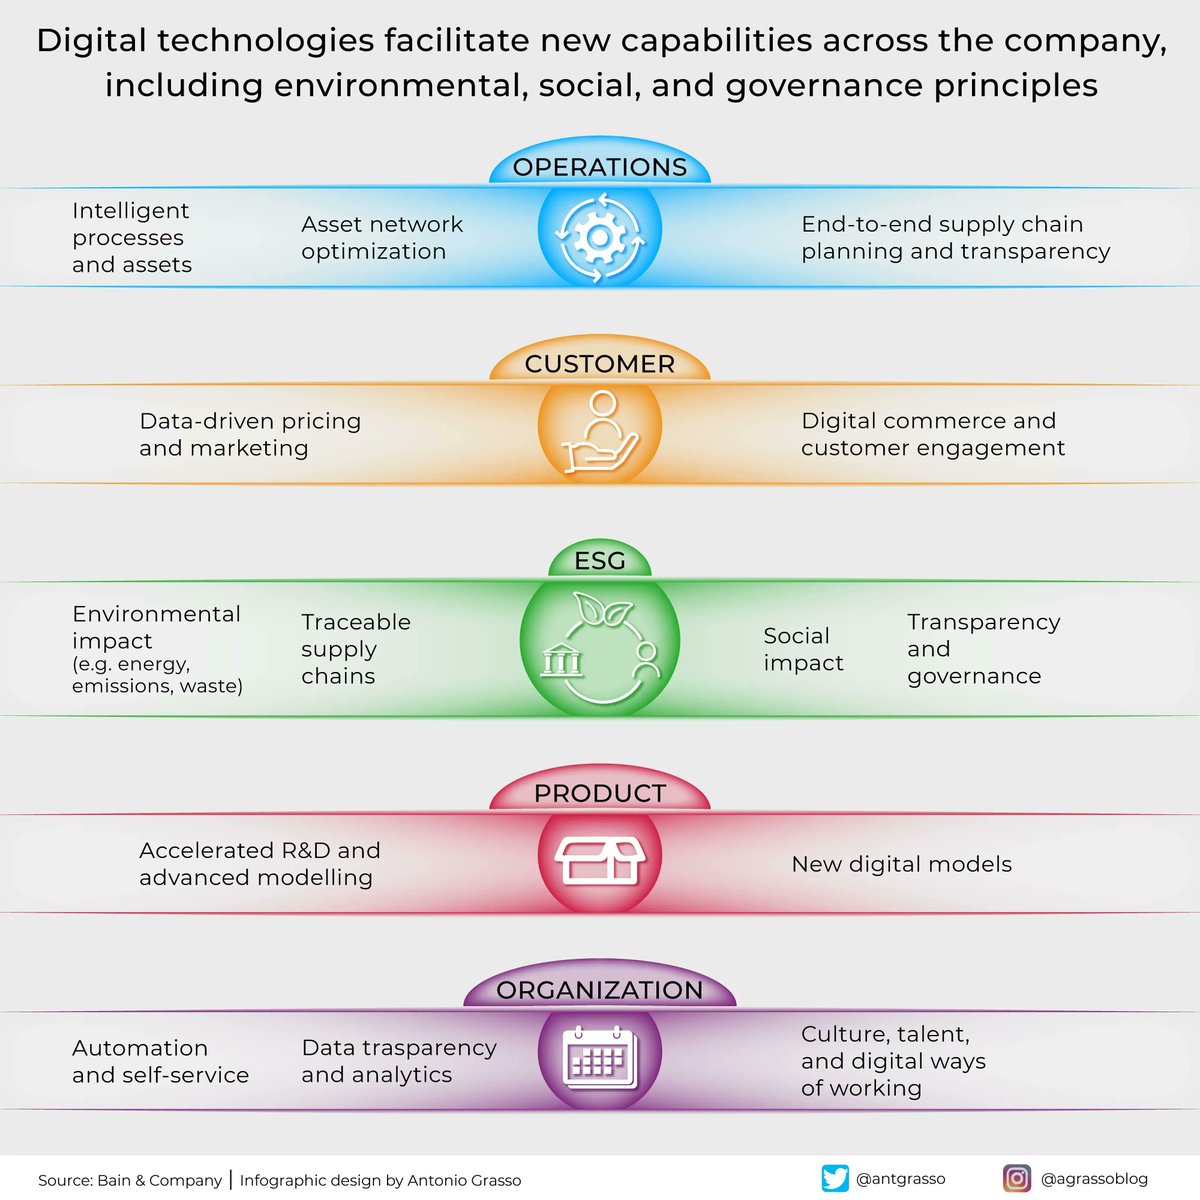 The capabilities that digital technologies enable are many. They pervasively impact the whole organization, spreading benefits across the organization and allowing a different vision for sustainability.
Microblog and social design by @antgrasso via
@LindaGrassO #ESG #Tech